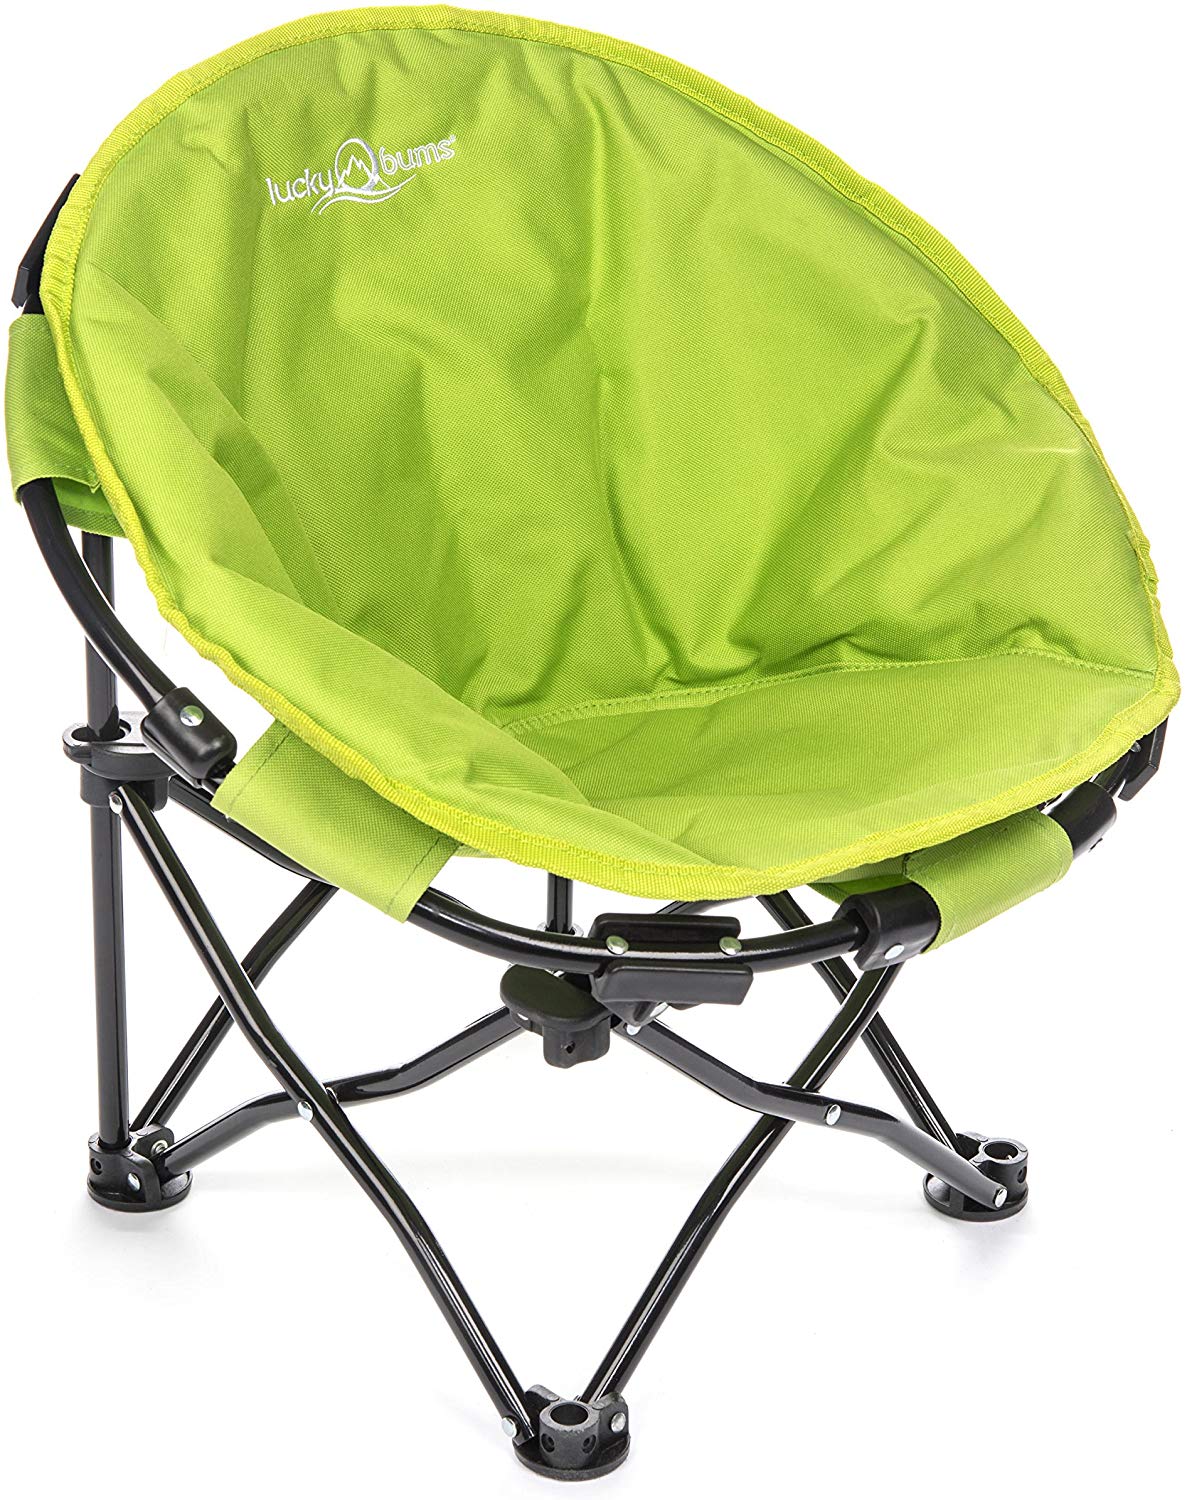 Green Lucky Bums Camp Chair 